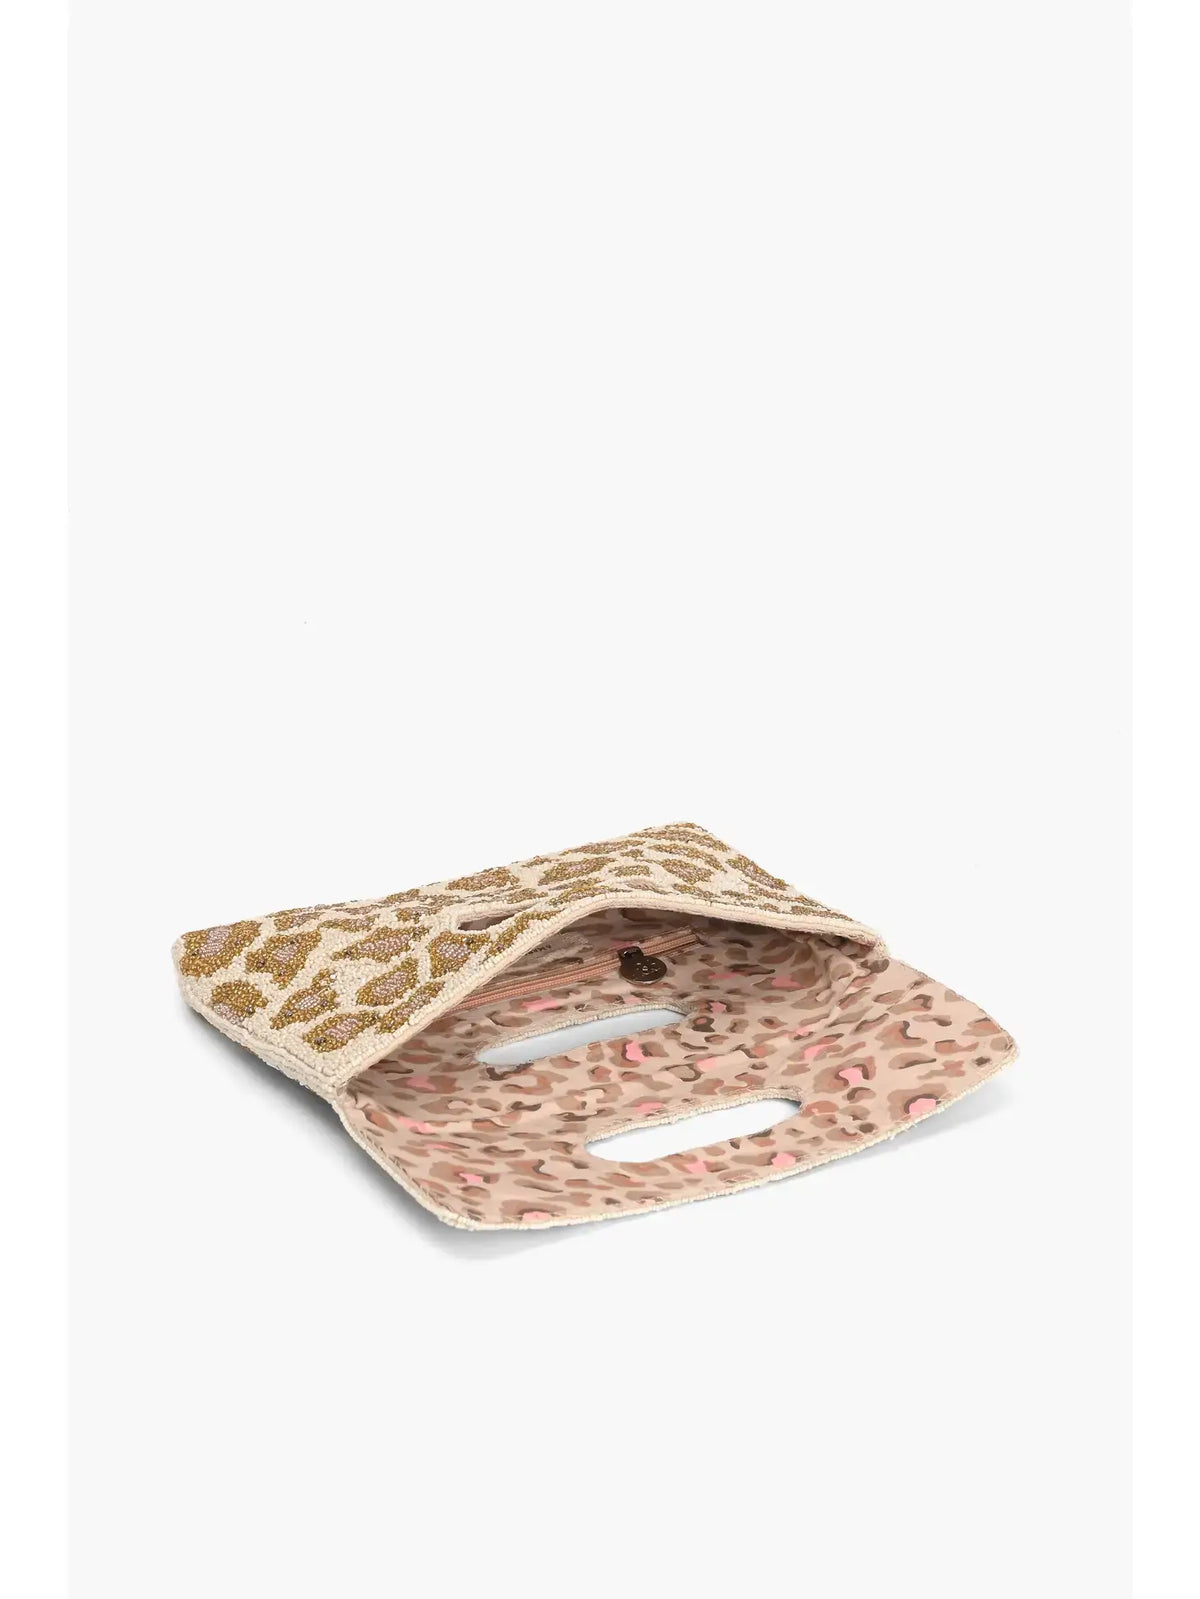 America and Beyond Rose Gold Leopard Clutch